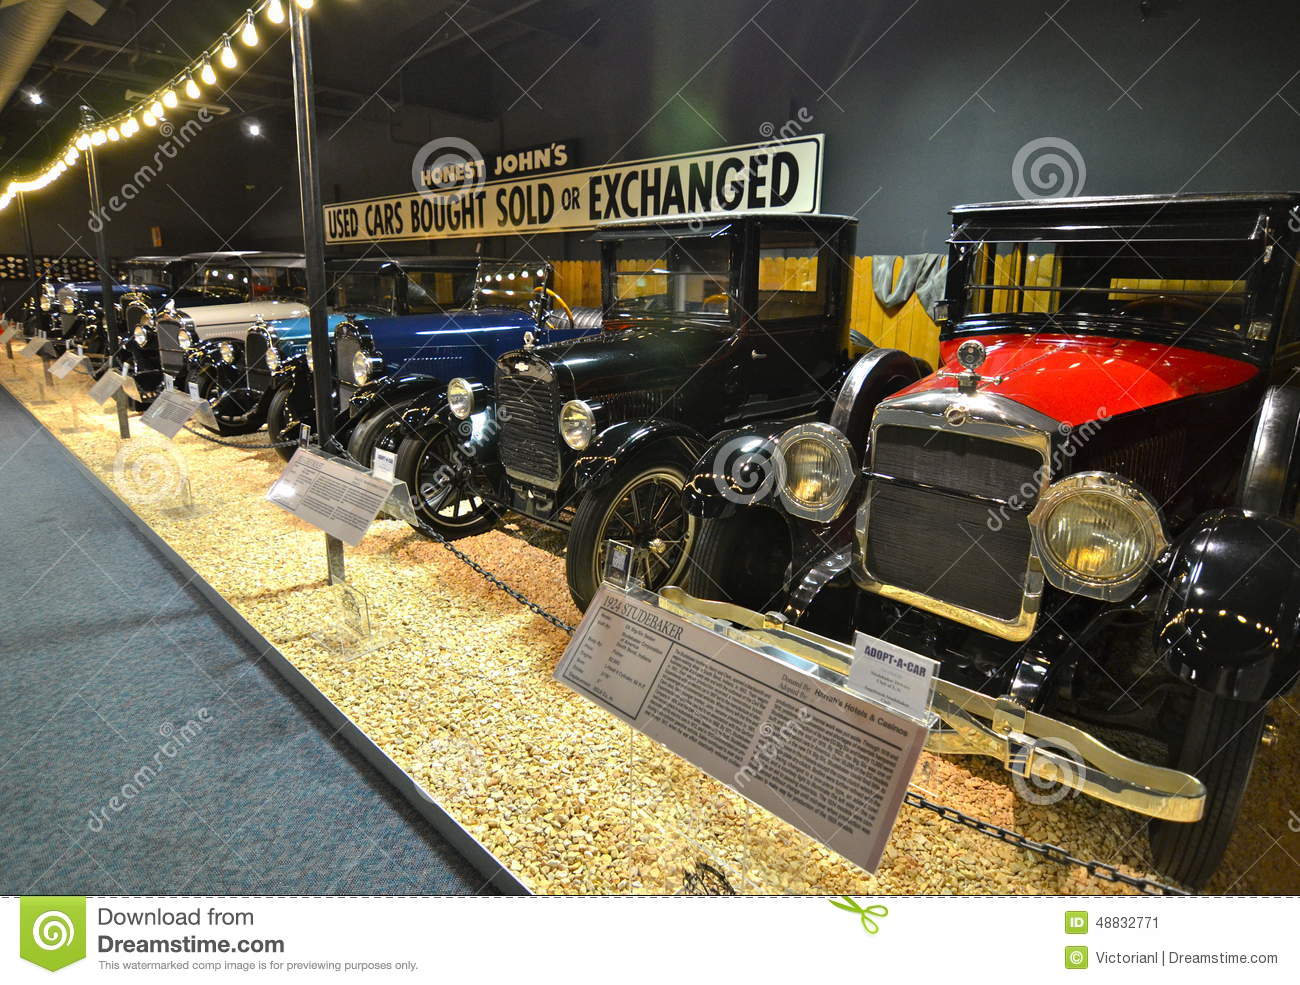 NATIONAL AUTOMOBILE MUSEUM image